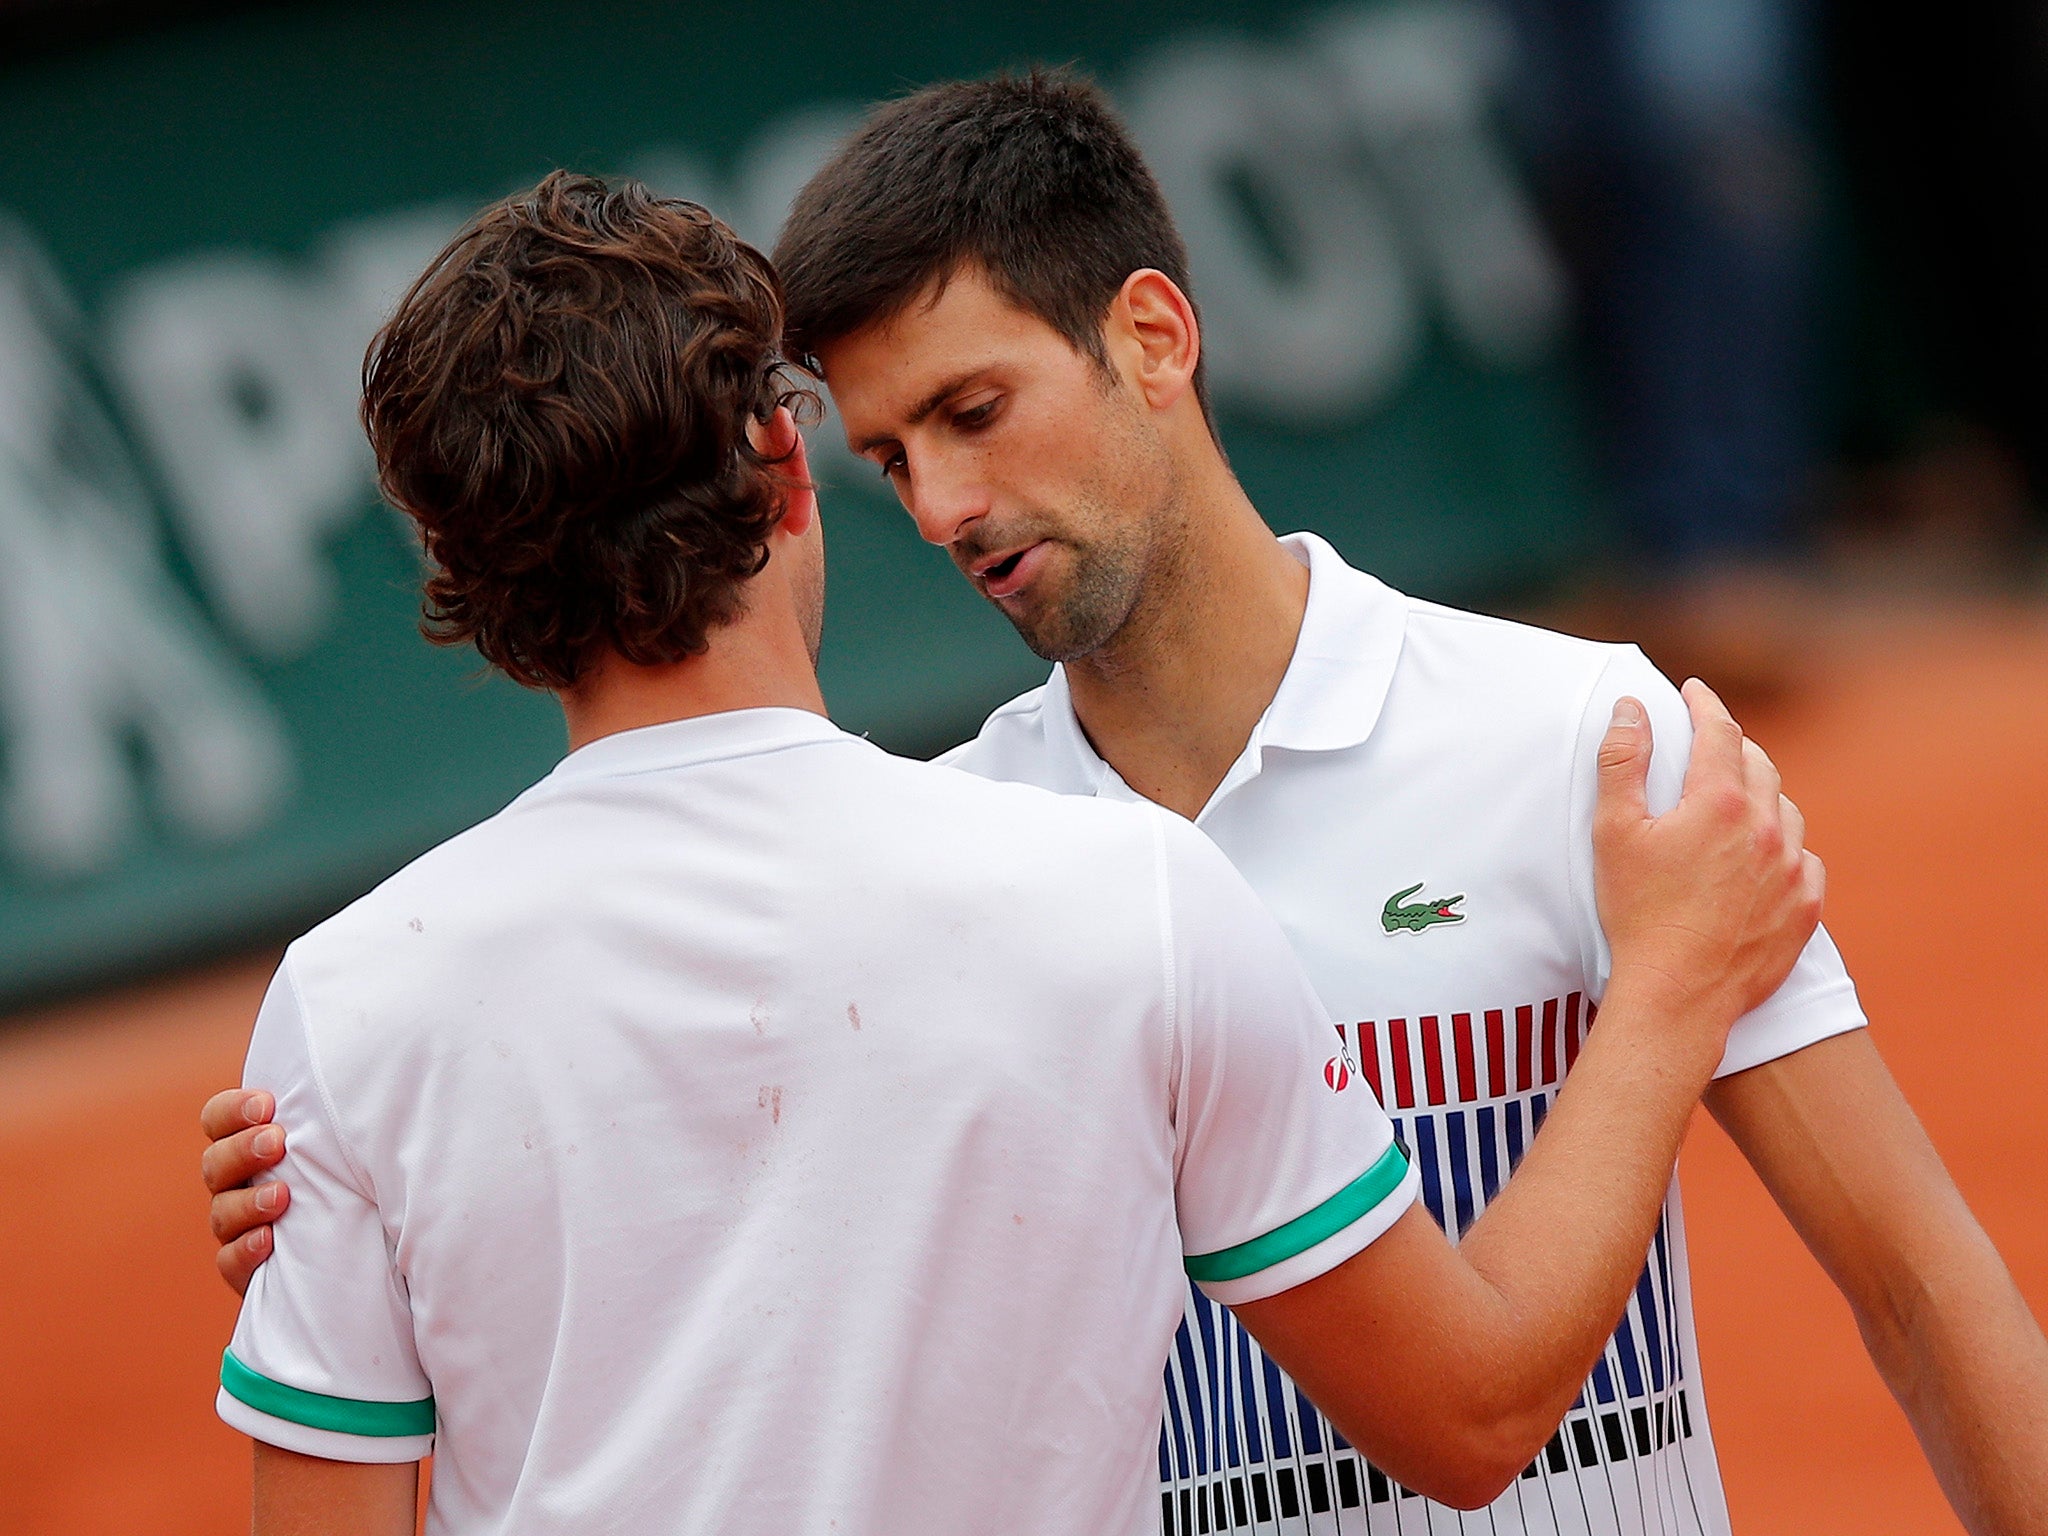 Djokovic was aiming to face Nadal in the semi-finals